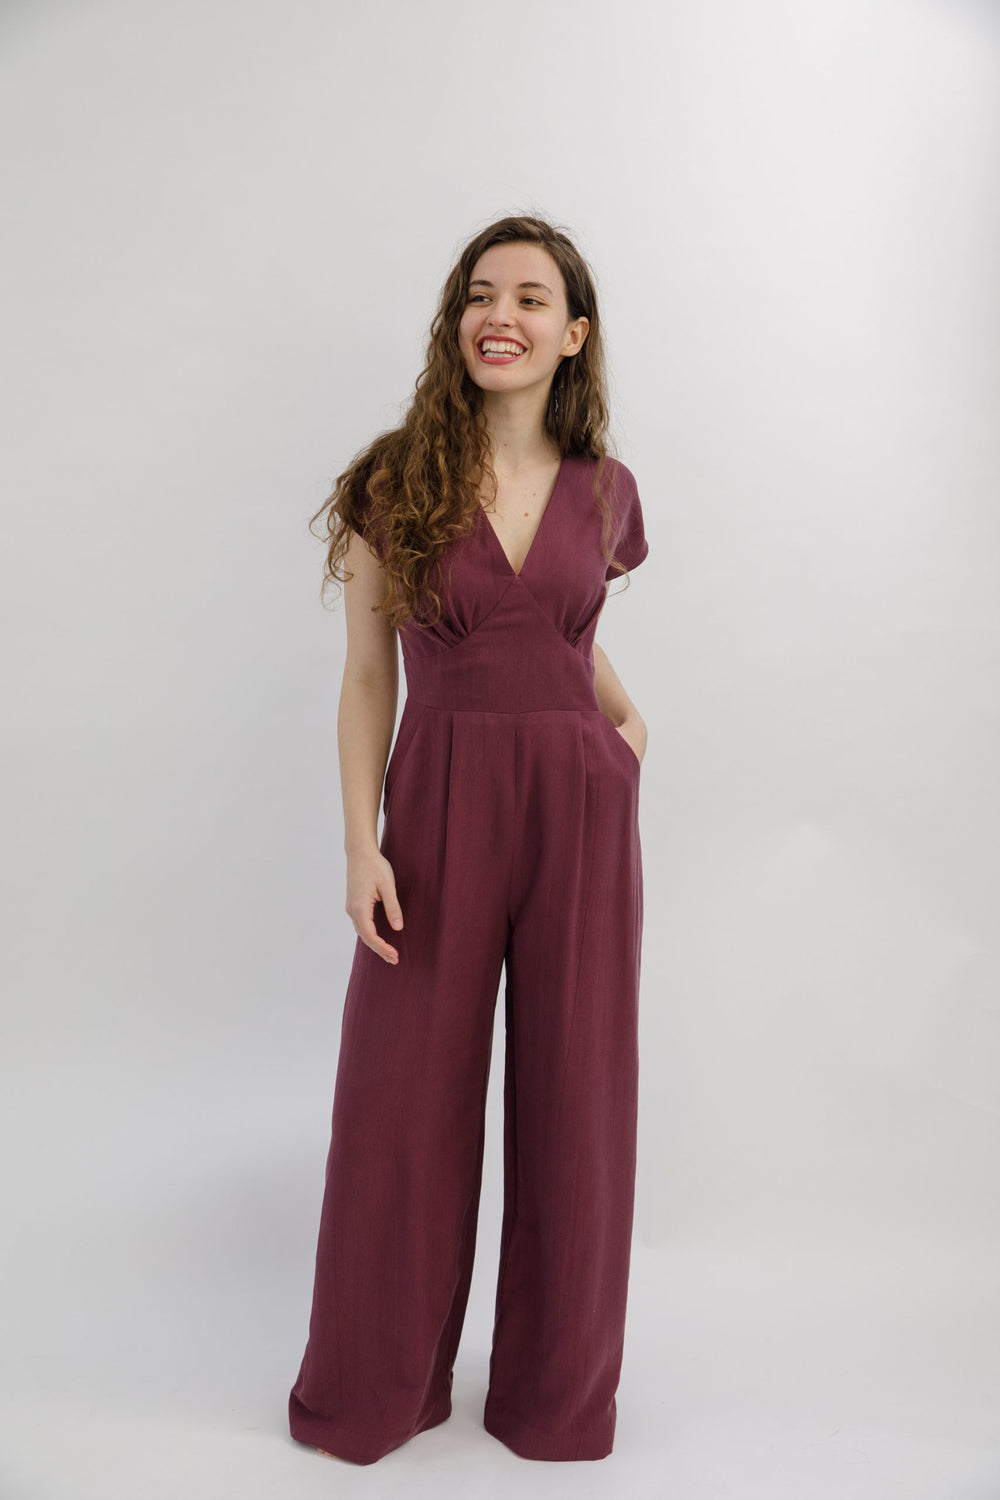 Women wearing the Springe Jumpsuit sewing pattern from Sew Love Patterns on The Fold Line. A jumpsuit pattern made in viscose, cupro, tencel, crepe or rayon fabrics, featuring a wide-leg, deep pockets, V-neck with gathering under the bust, curved waistban